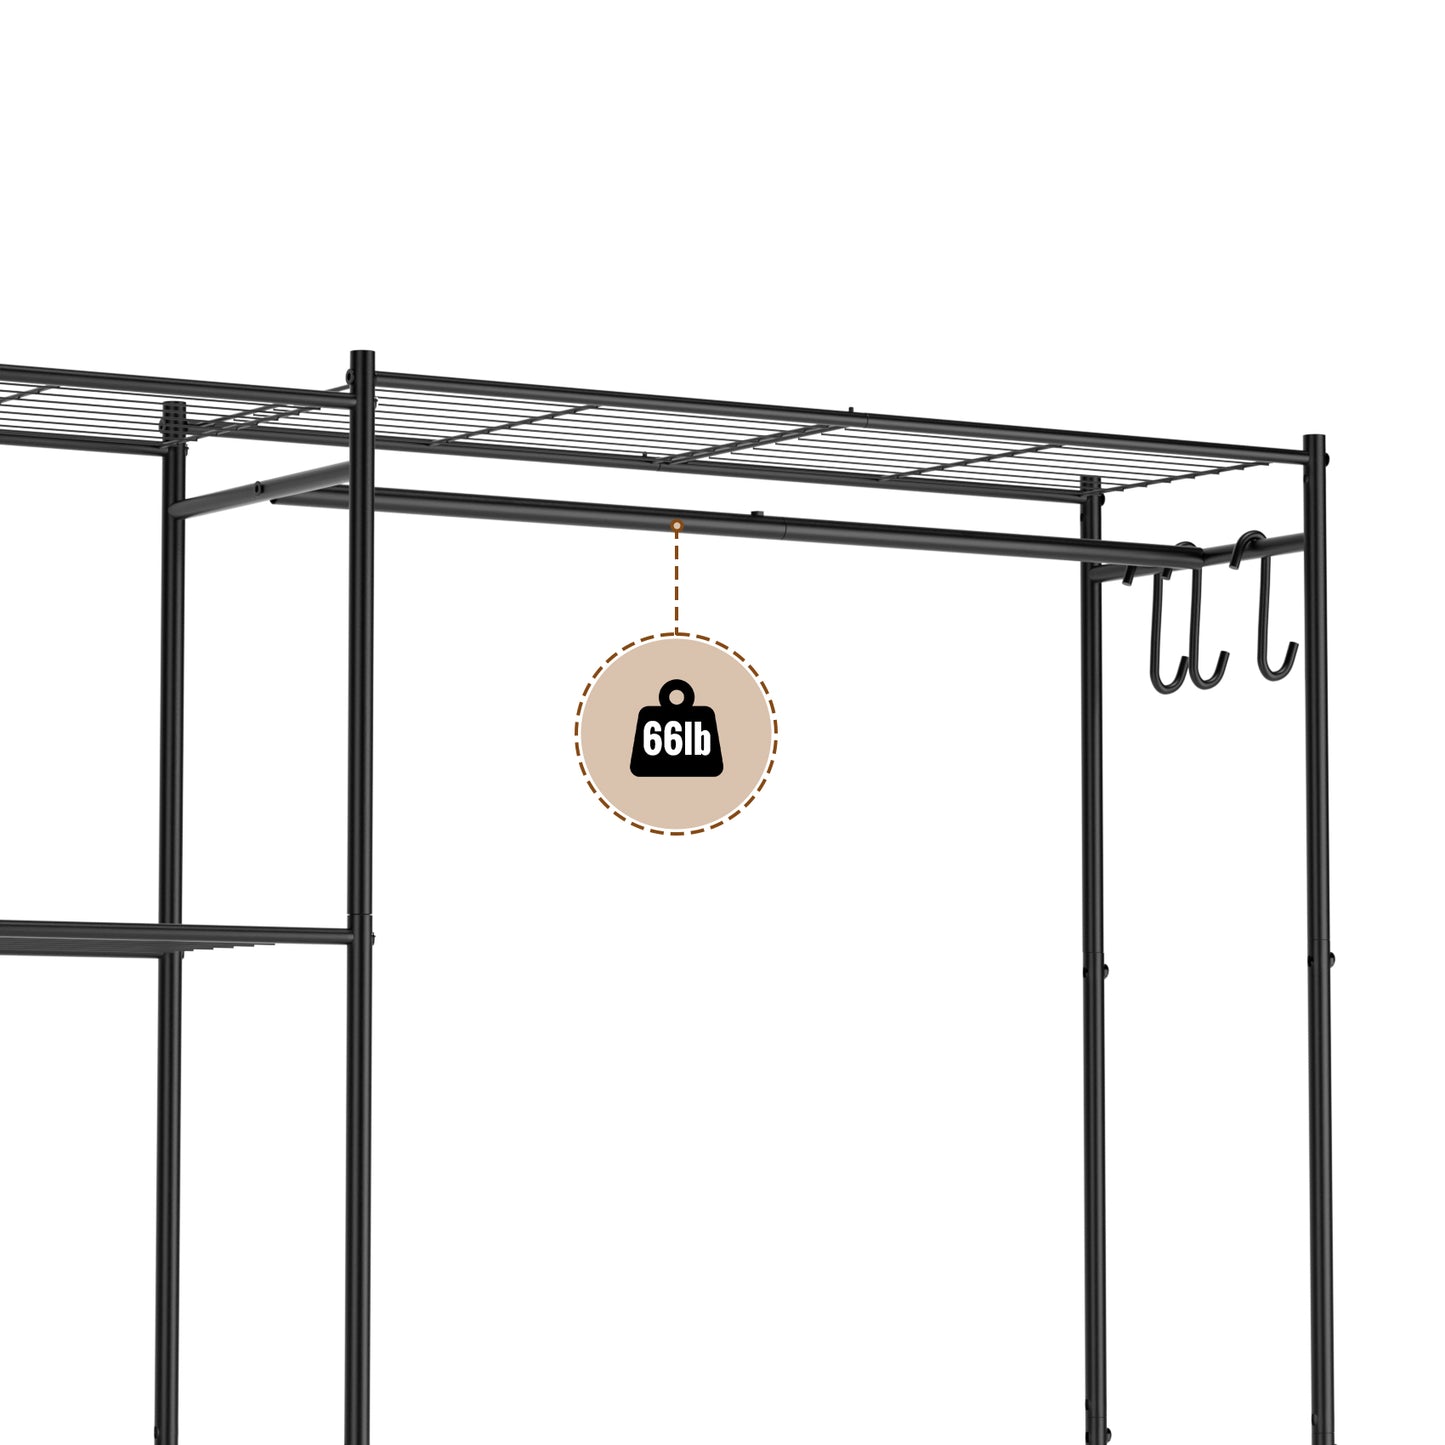 Neprock Portable Wardrobe Closet for Hanging Clothes Rods-Black